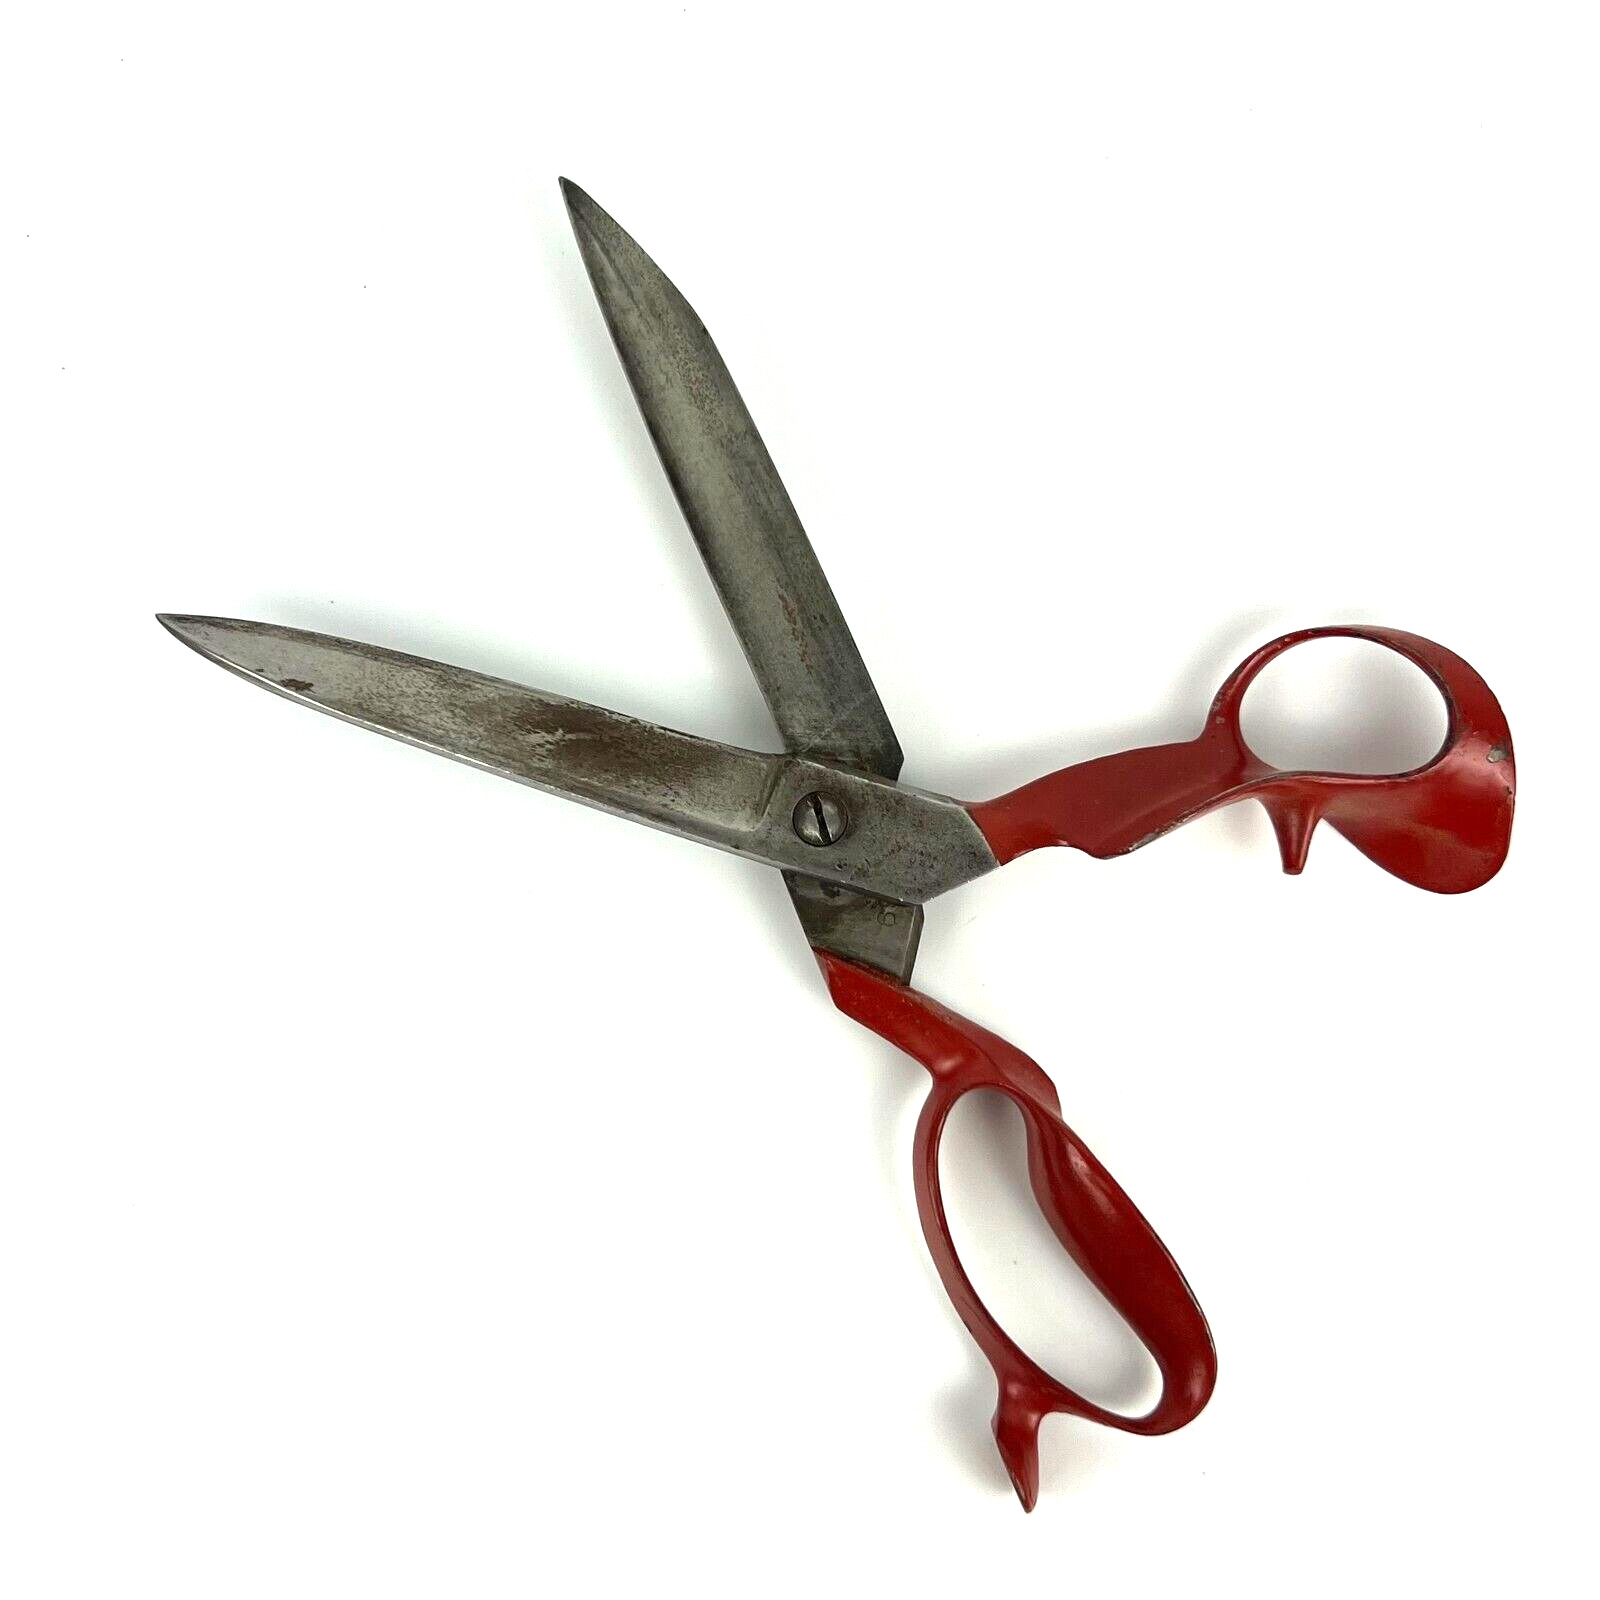 Vintage R. Heinisch Tailor's Shears Large Textile Scissors 12 inch Red Handle